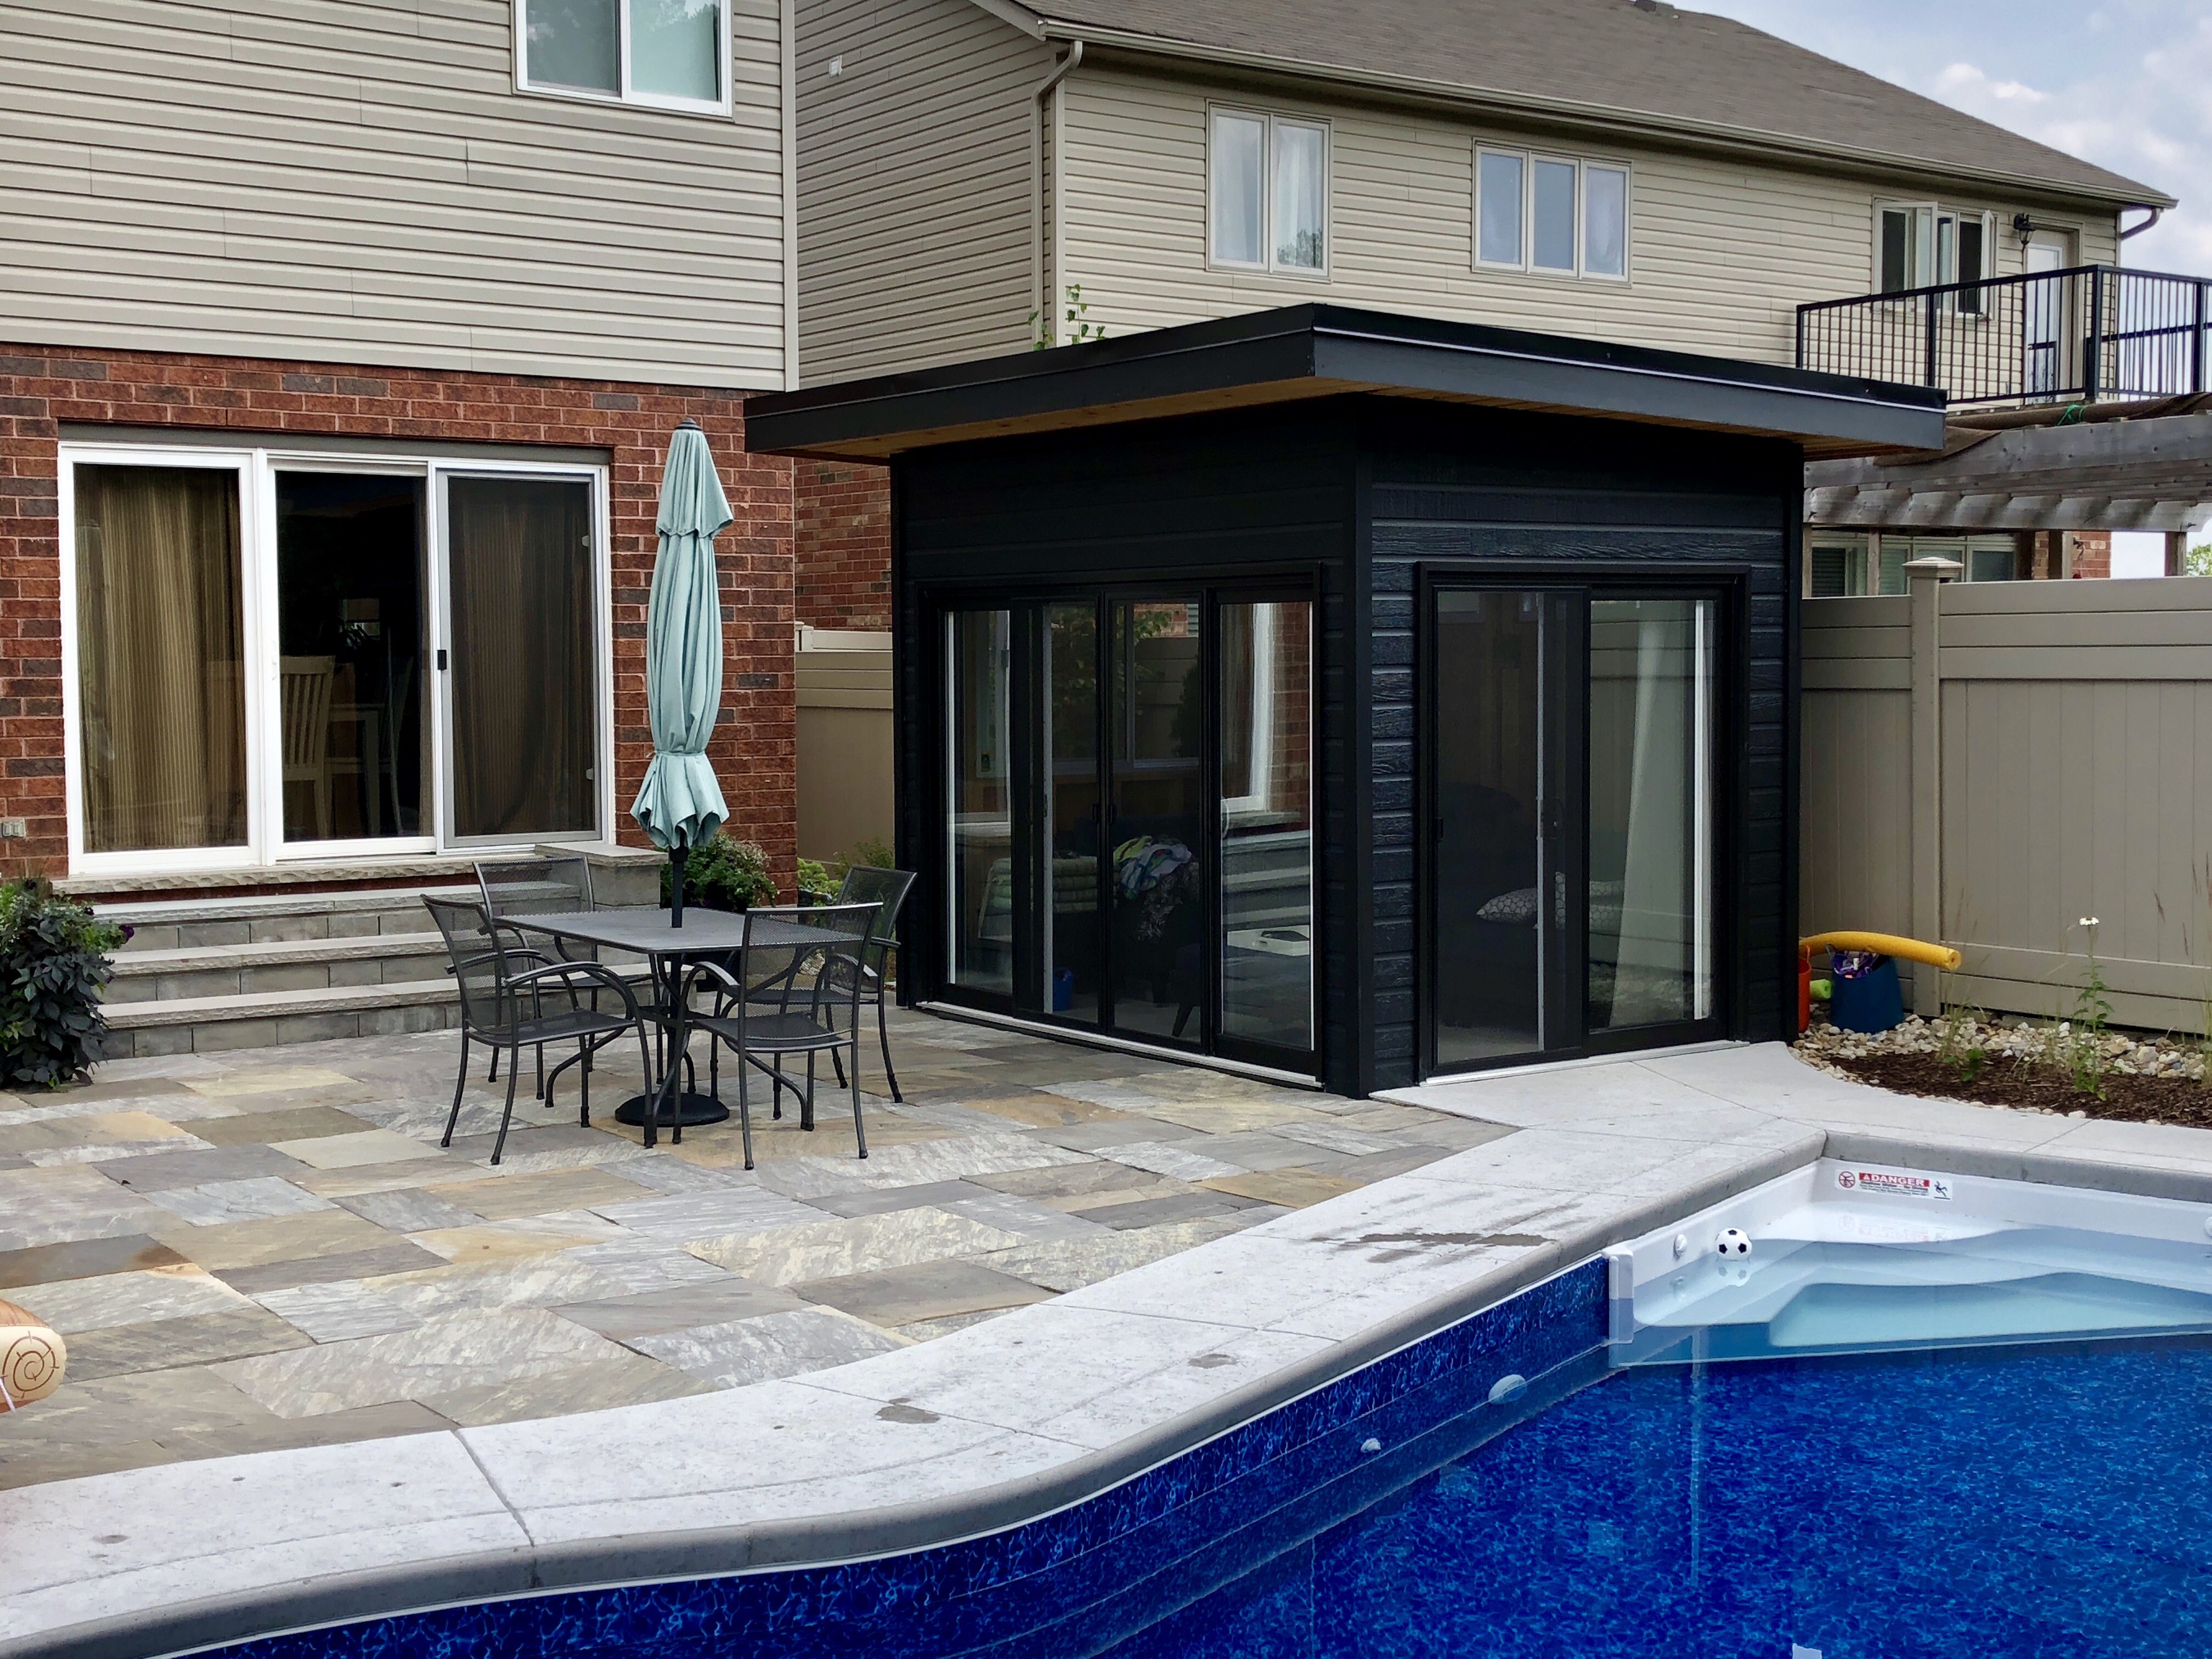 Canexel Verana 8x11 shed kit with Patio Doors in Guelph Ontario. ID number 221370-4